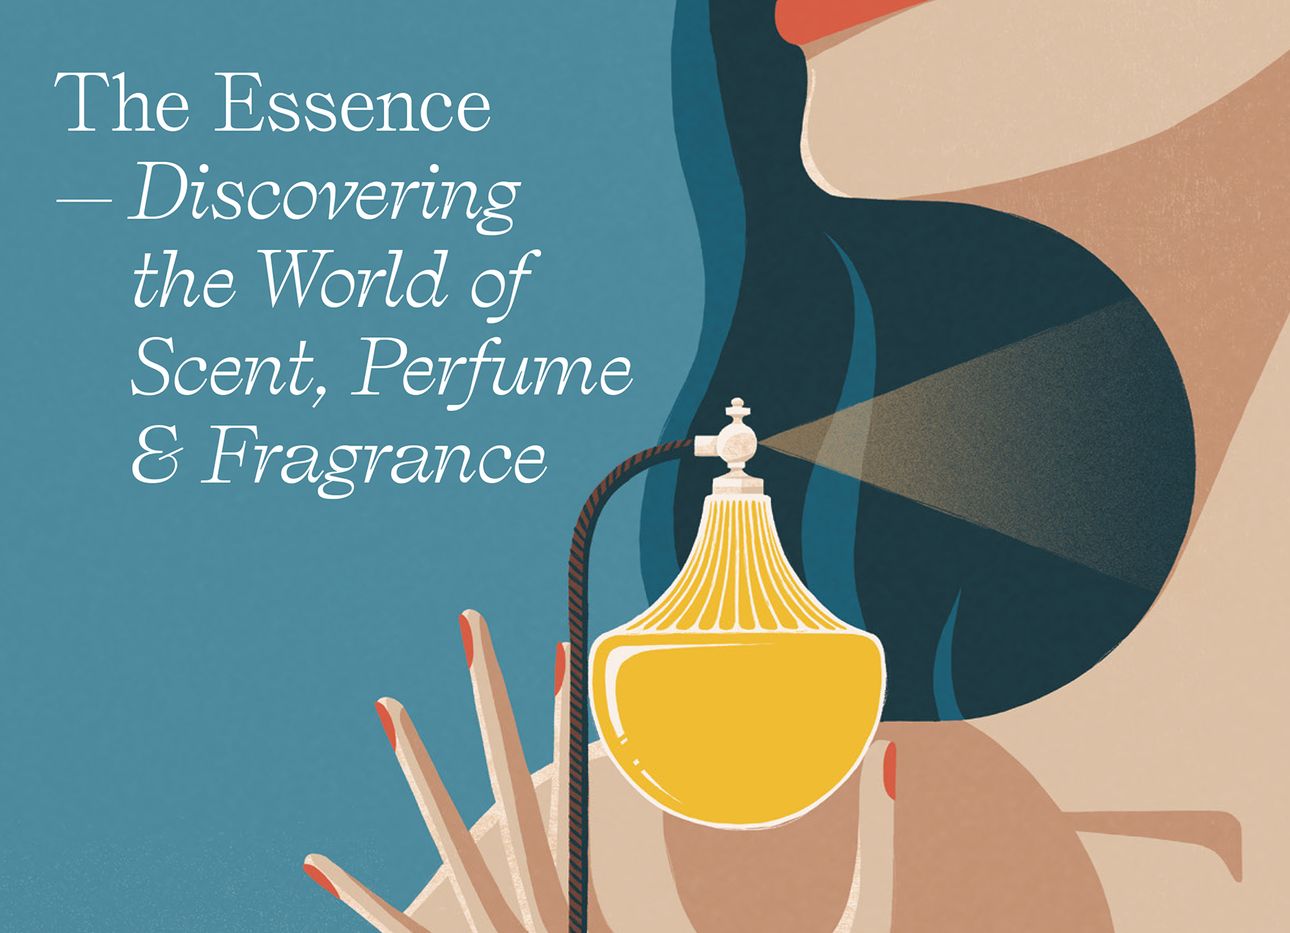 The book cover of The Essence, depicting a woman donning perfume.